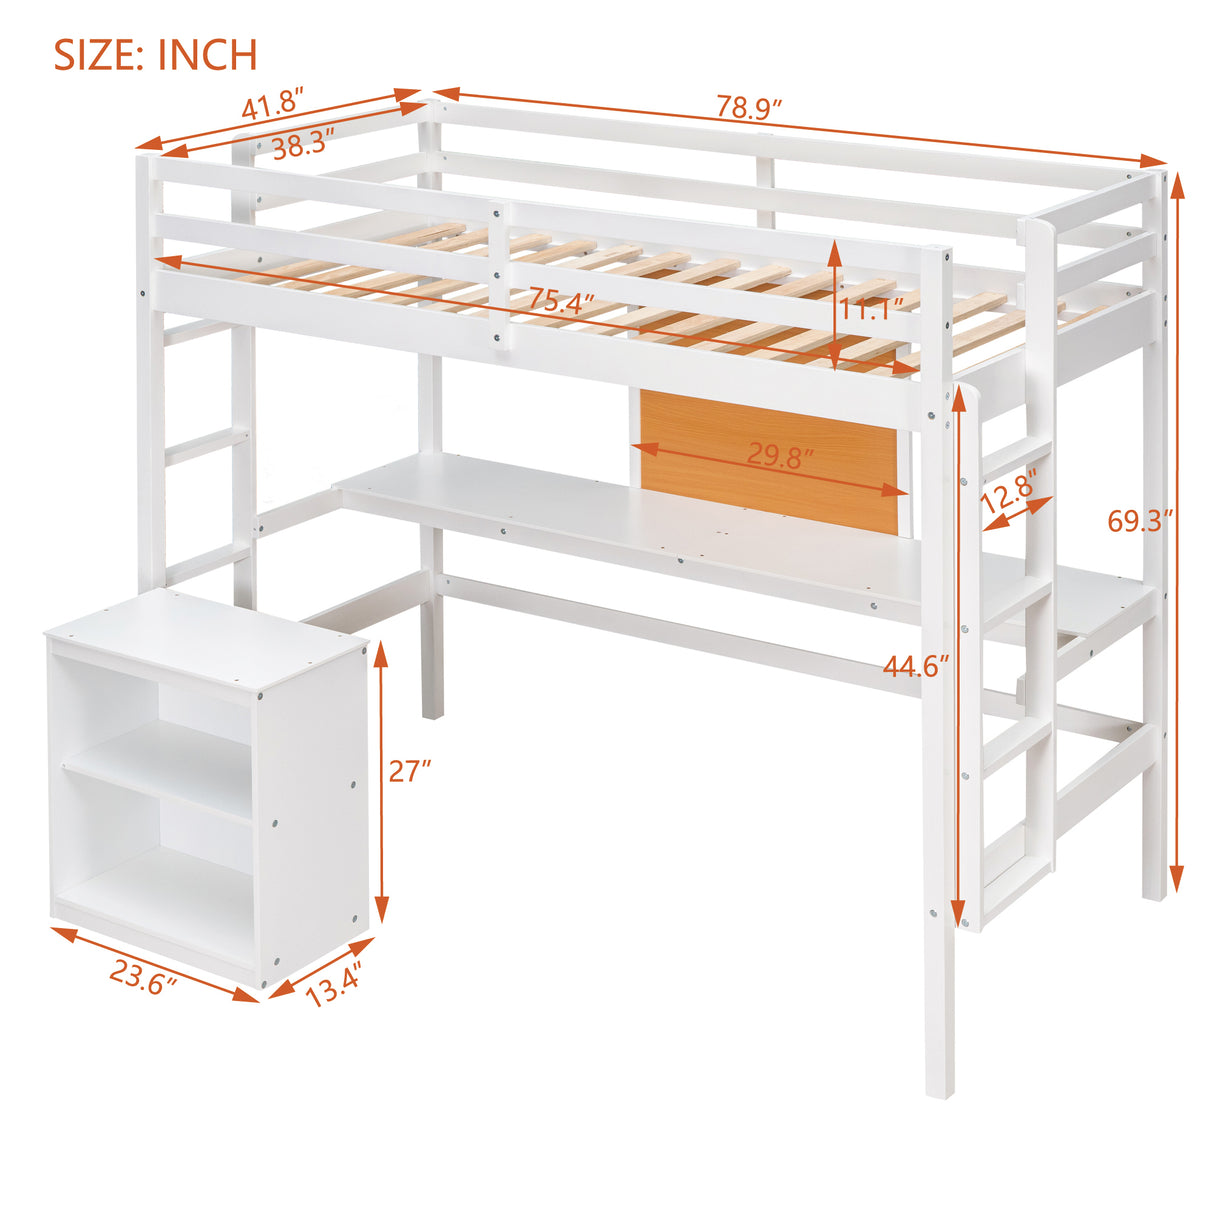 Twin size Loft Bed with Desk and Writing Board, Wooden Loft Bed with Desk & 2 Drawers Cabinet- White - Home Elegance USA